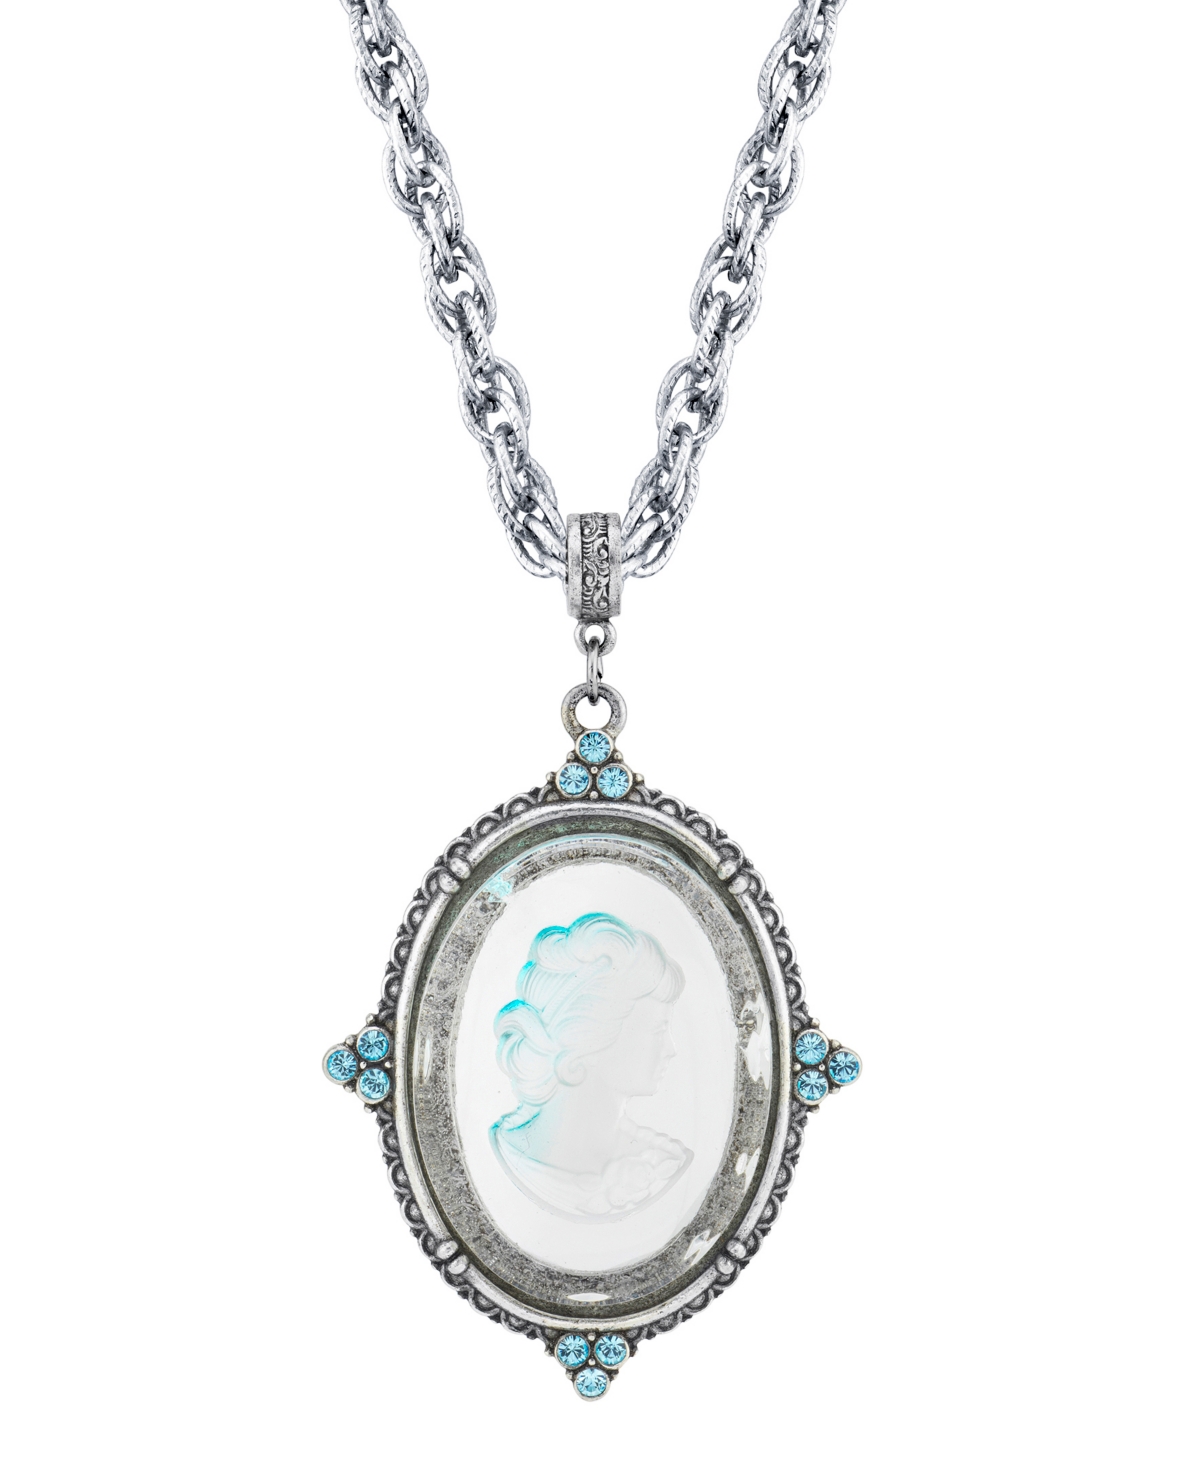 2028 Silver-tone Crystal Accents Necklace In Blue